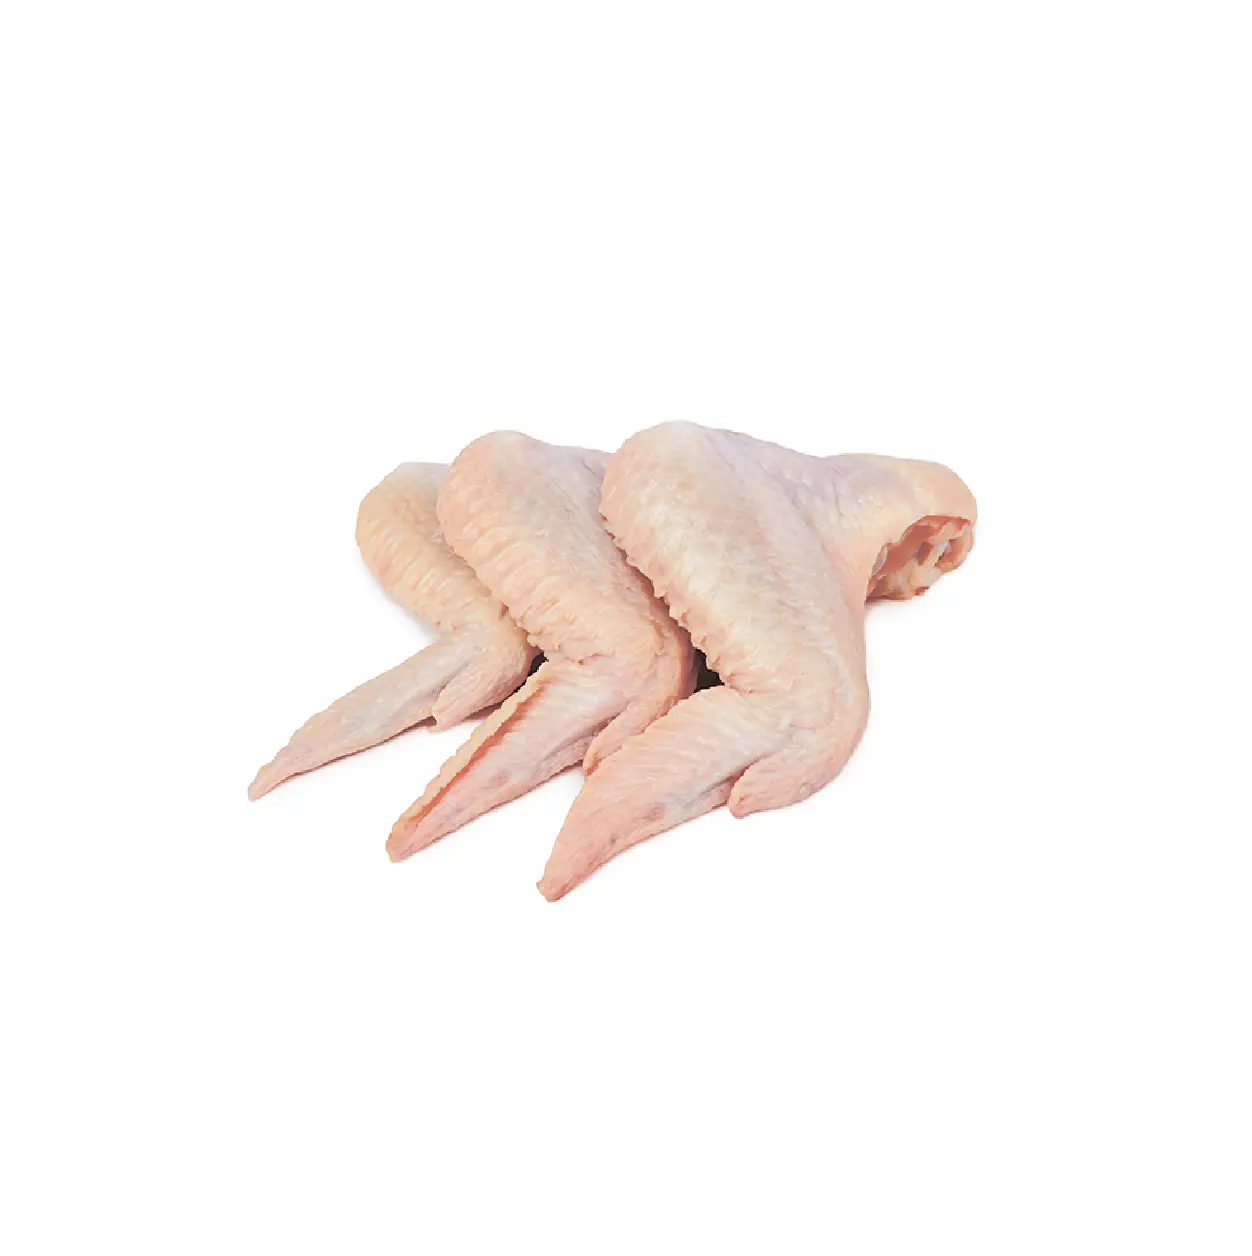 Frozen Chicken 3 Joint Wings Tips - Wholesale Price (Halal Certified Crispy Texture Perfect for Snacking)